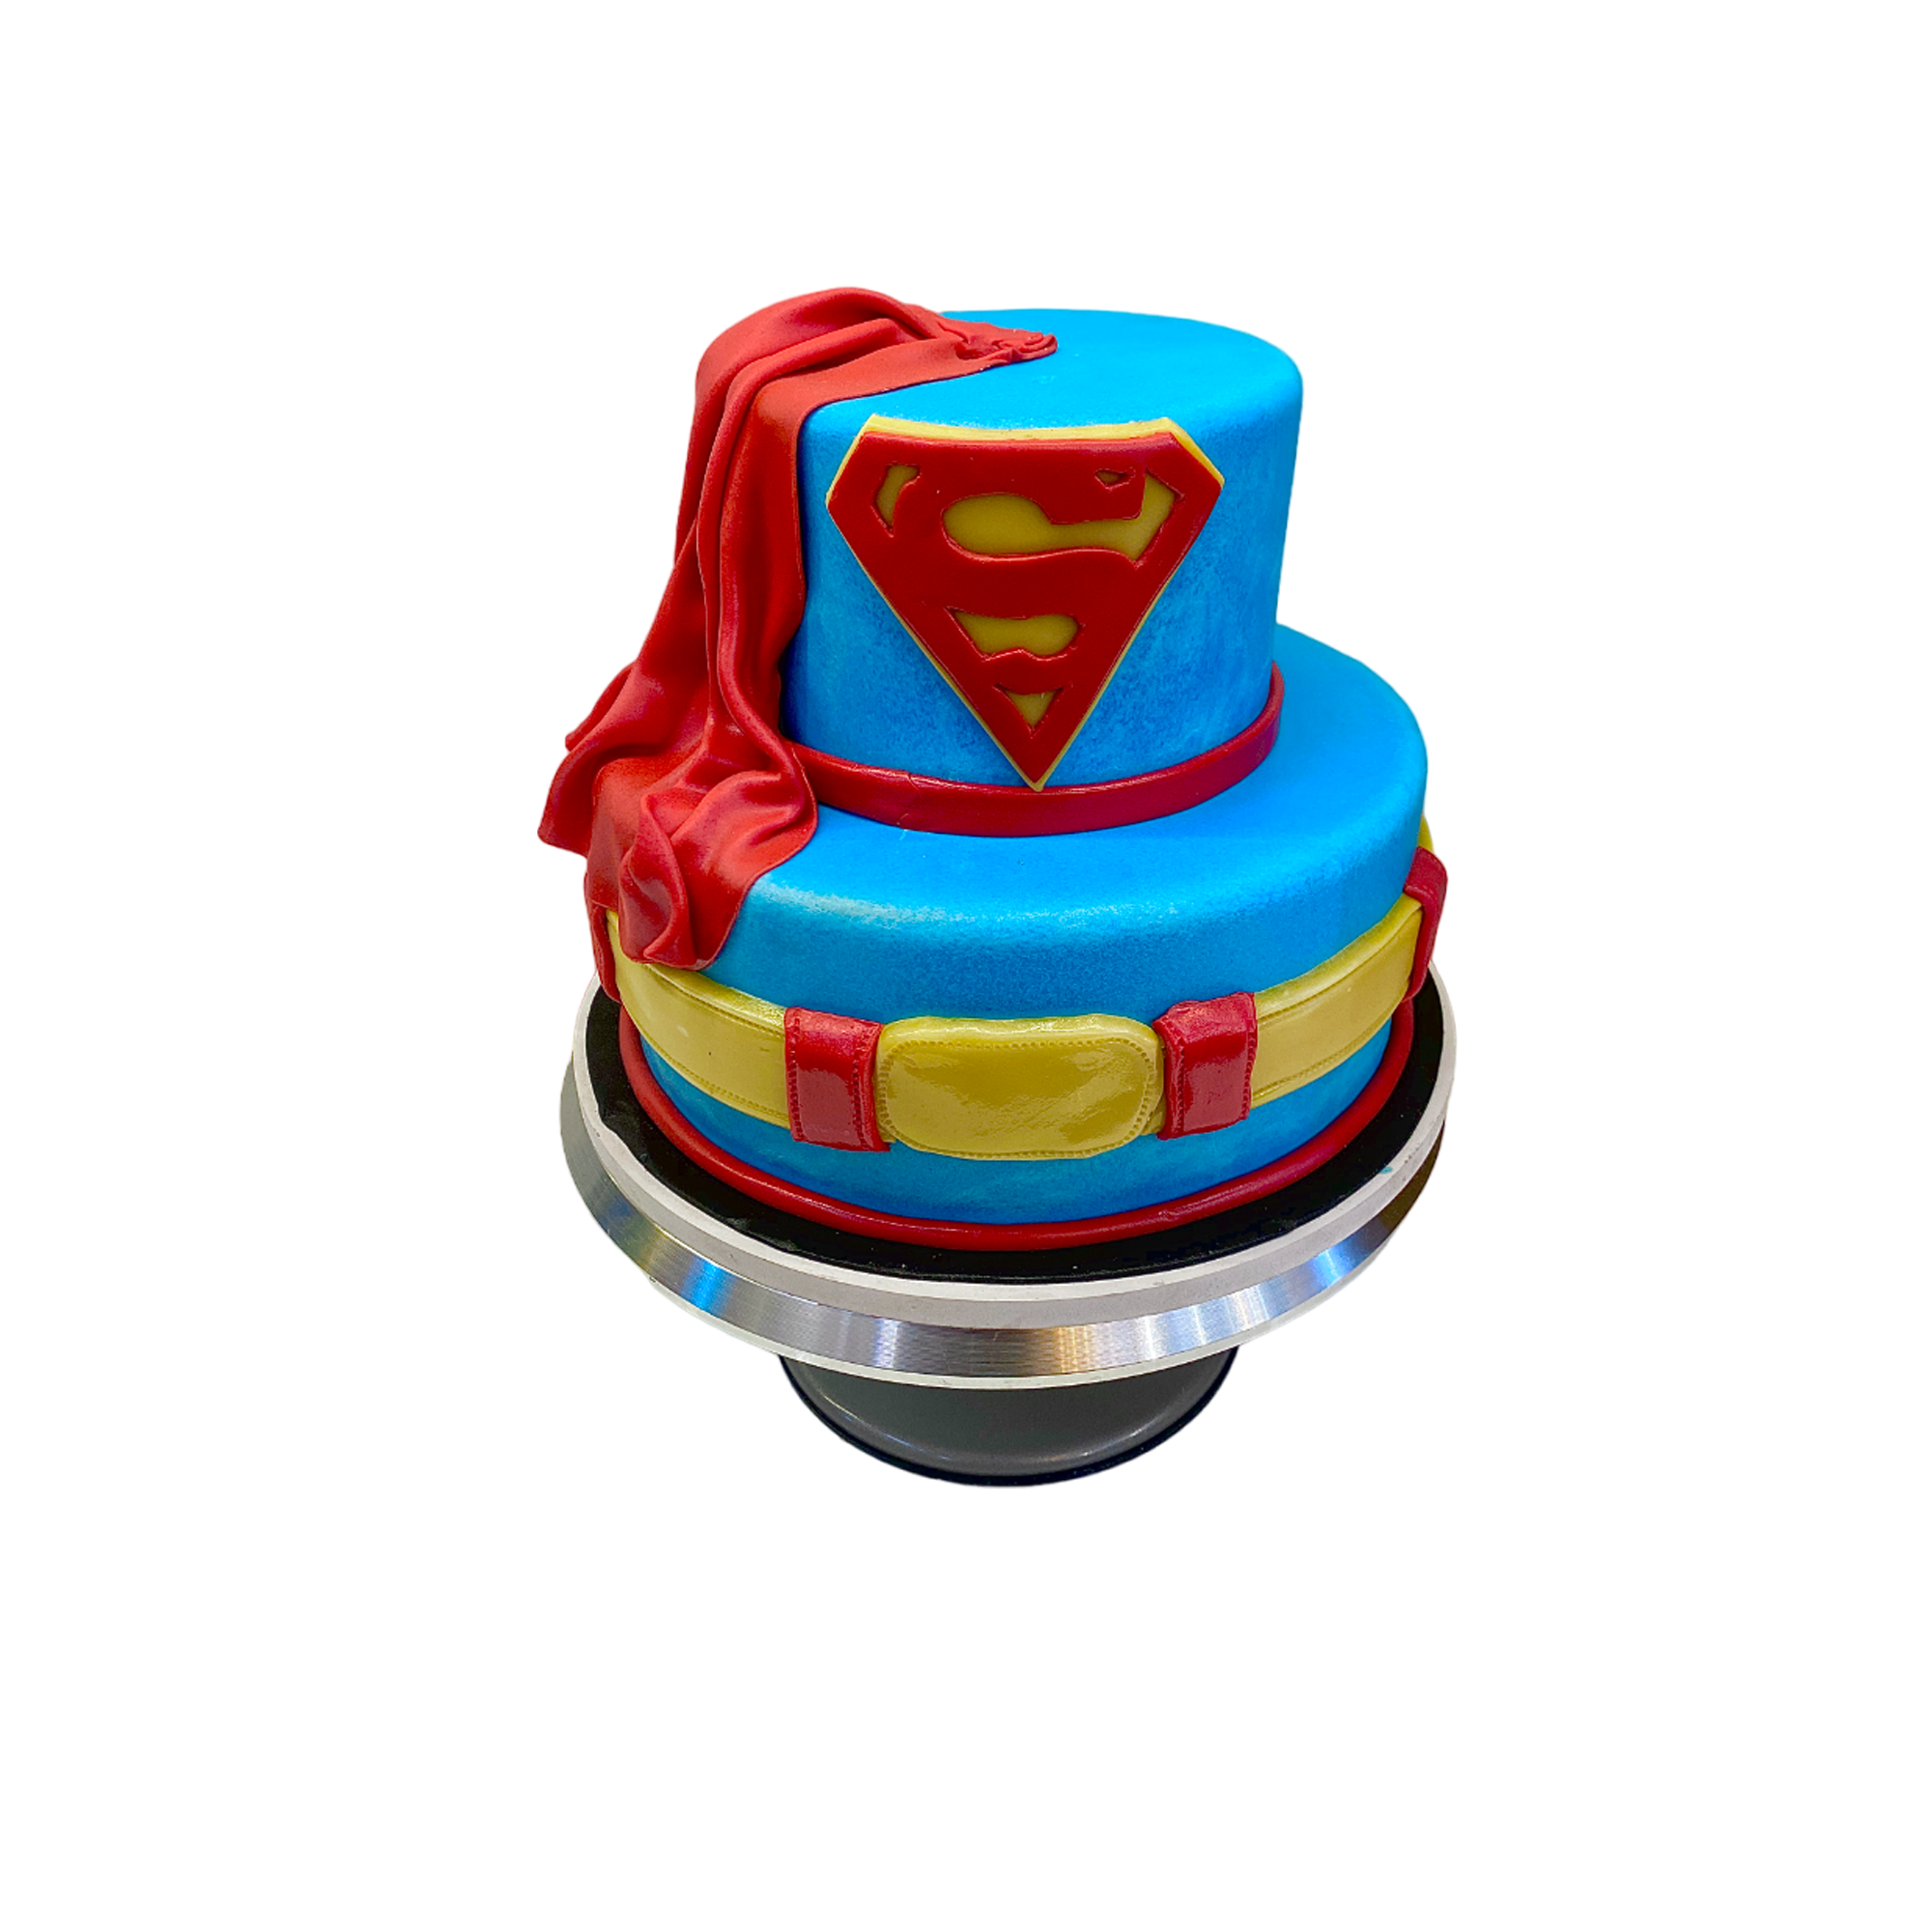 Superman Bursting Out of the Cake (Exploding Cake Tutorial): Part 1